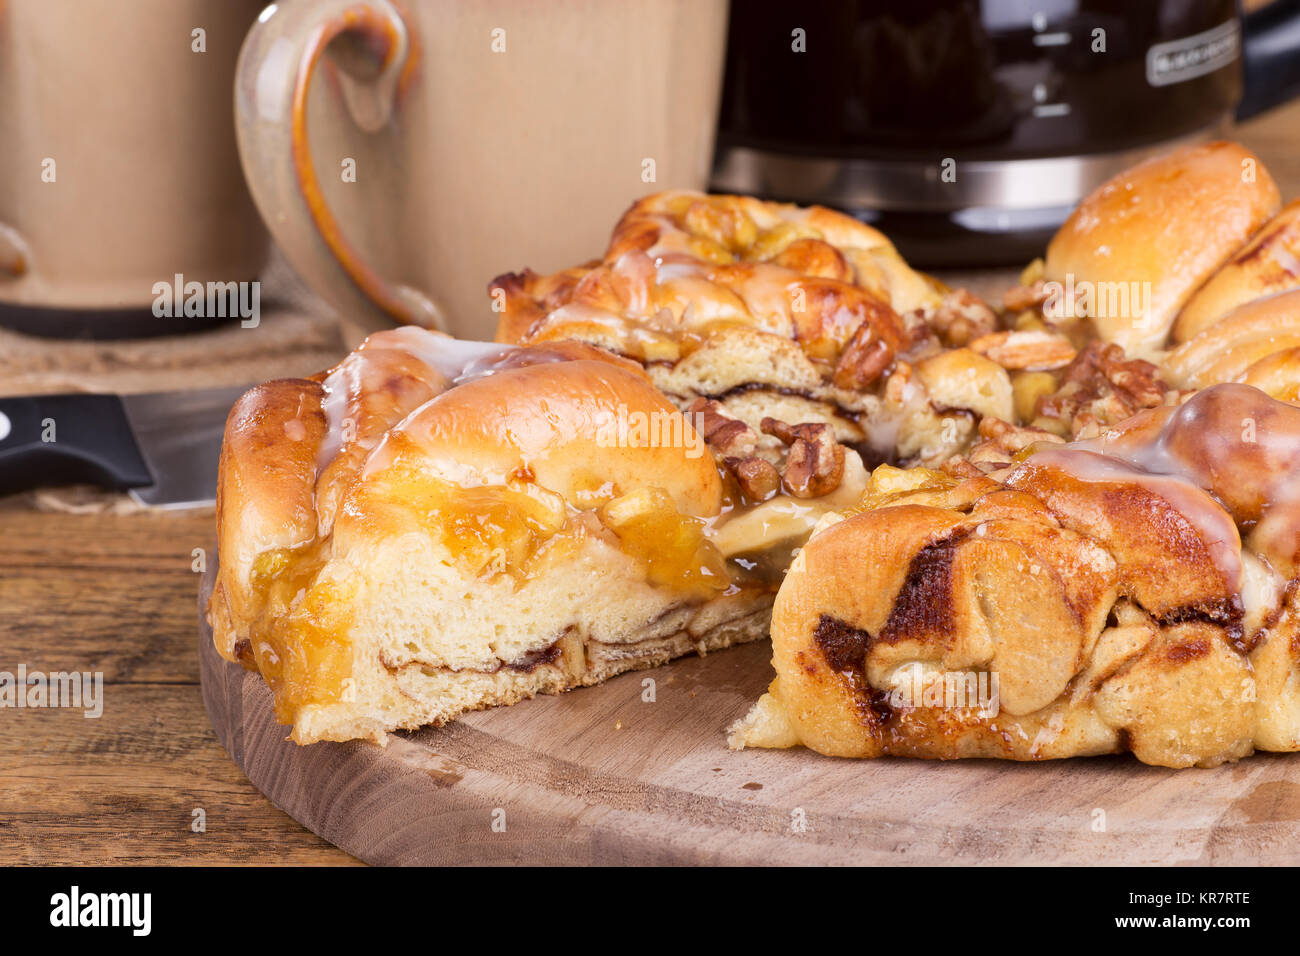 Closeup of a slice of apple pecan sweet bread on a wooden platter Stock Photo